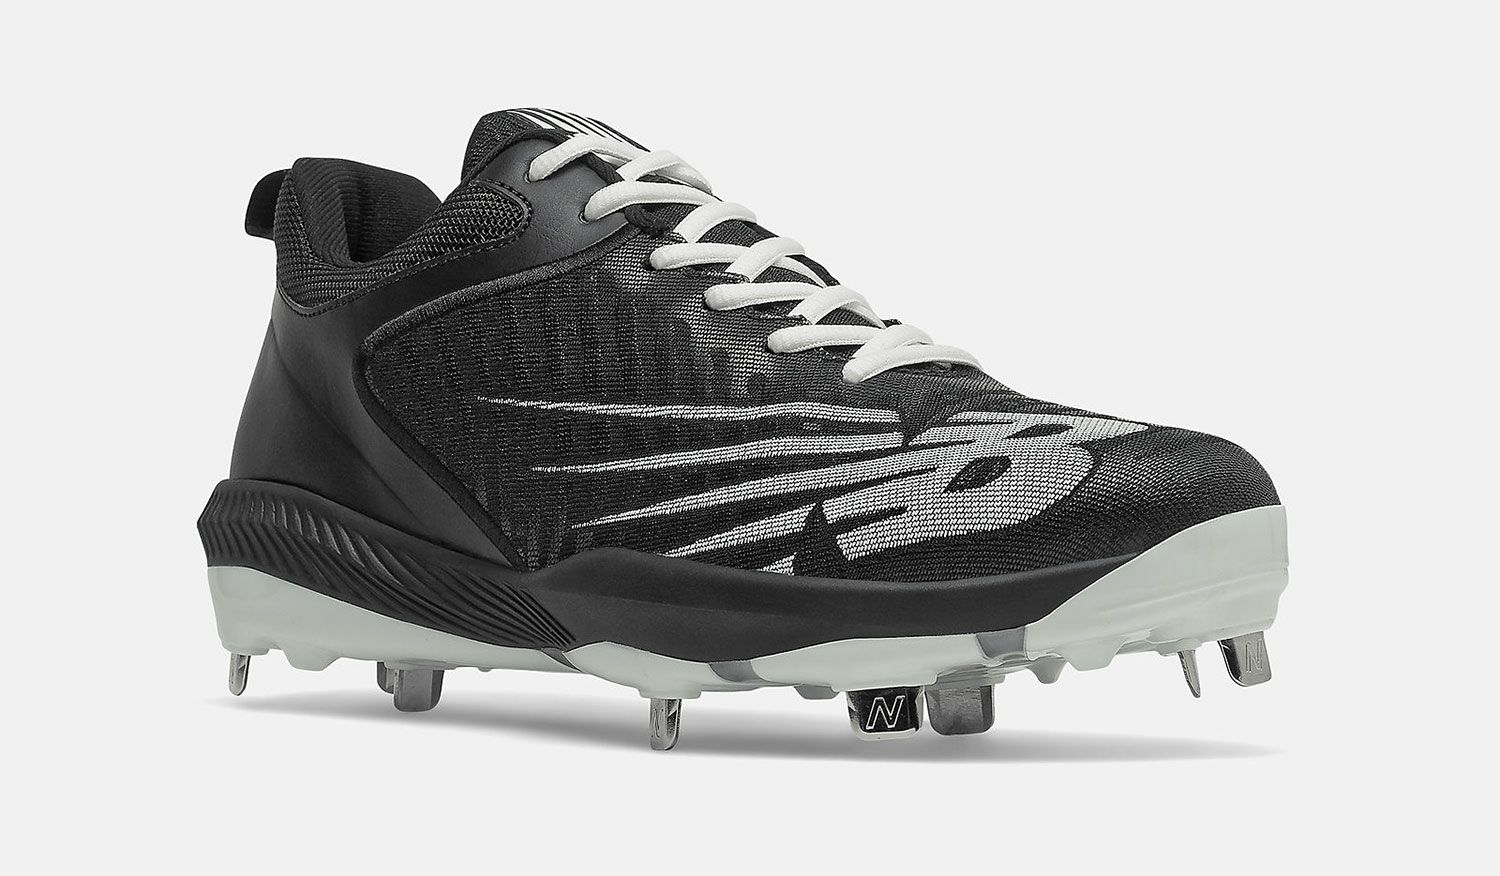 New Balance FuelCell 4040 v6 product image of a black cleat with grey New Balance branding along the side.